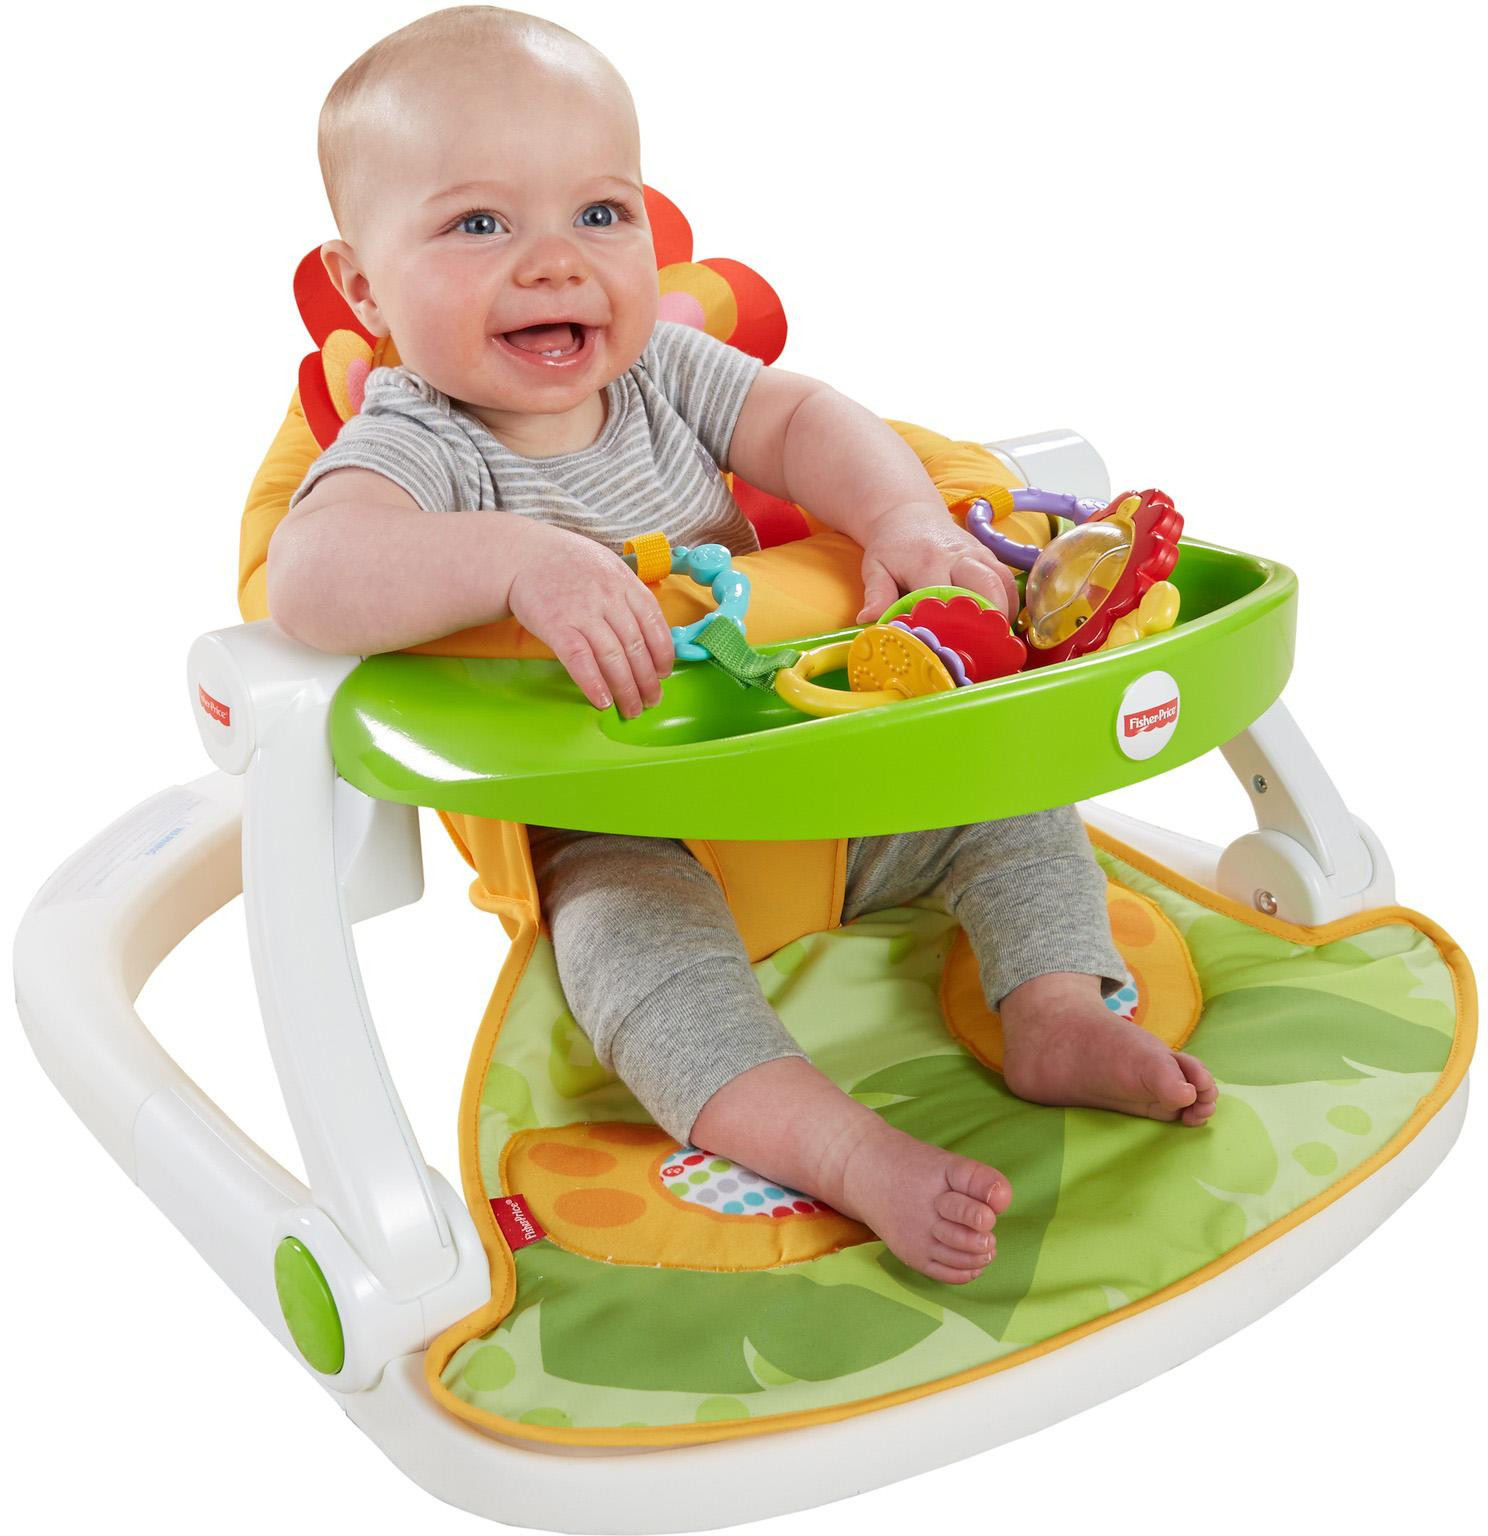 Best ideas about Baby Floor Seat
. Save or Pin Amazon Fisher Price Sit Me Up Floor Seat with Tray Now.